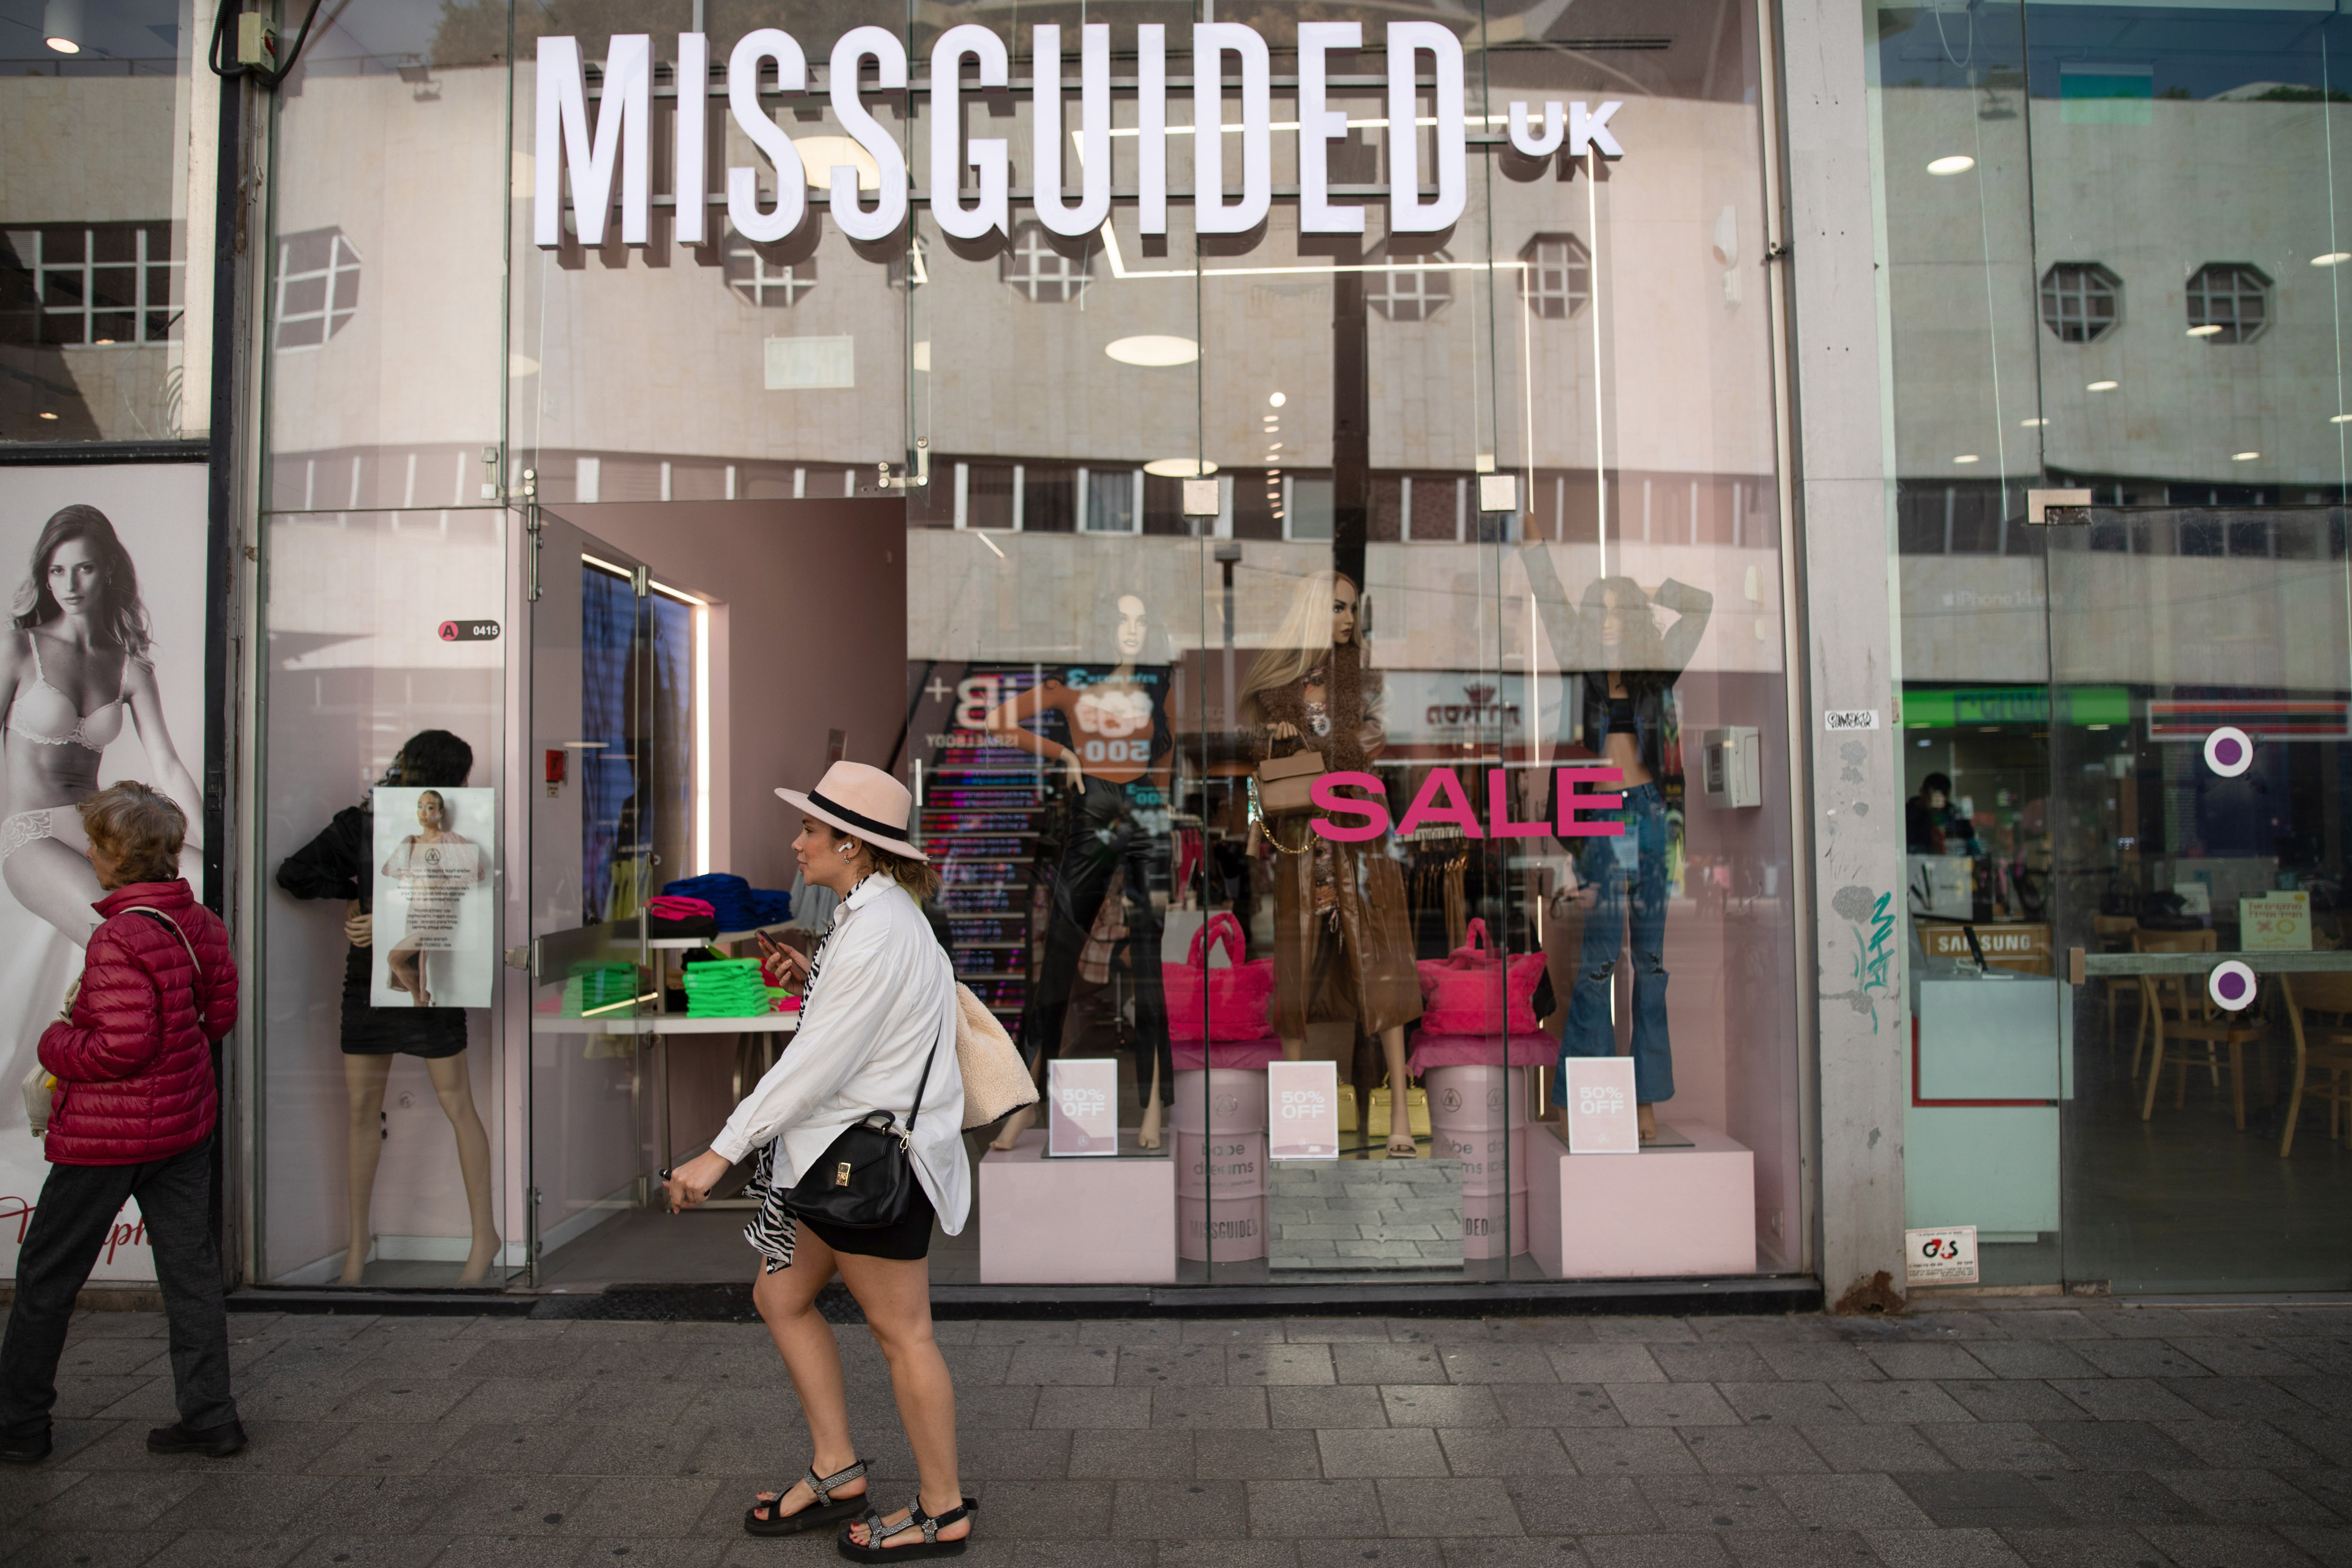 MISSGUIDED (@missguided) • Instagram photos and videos